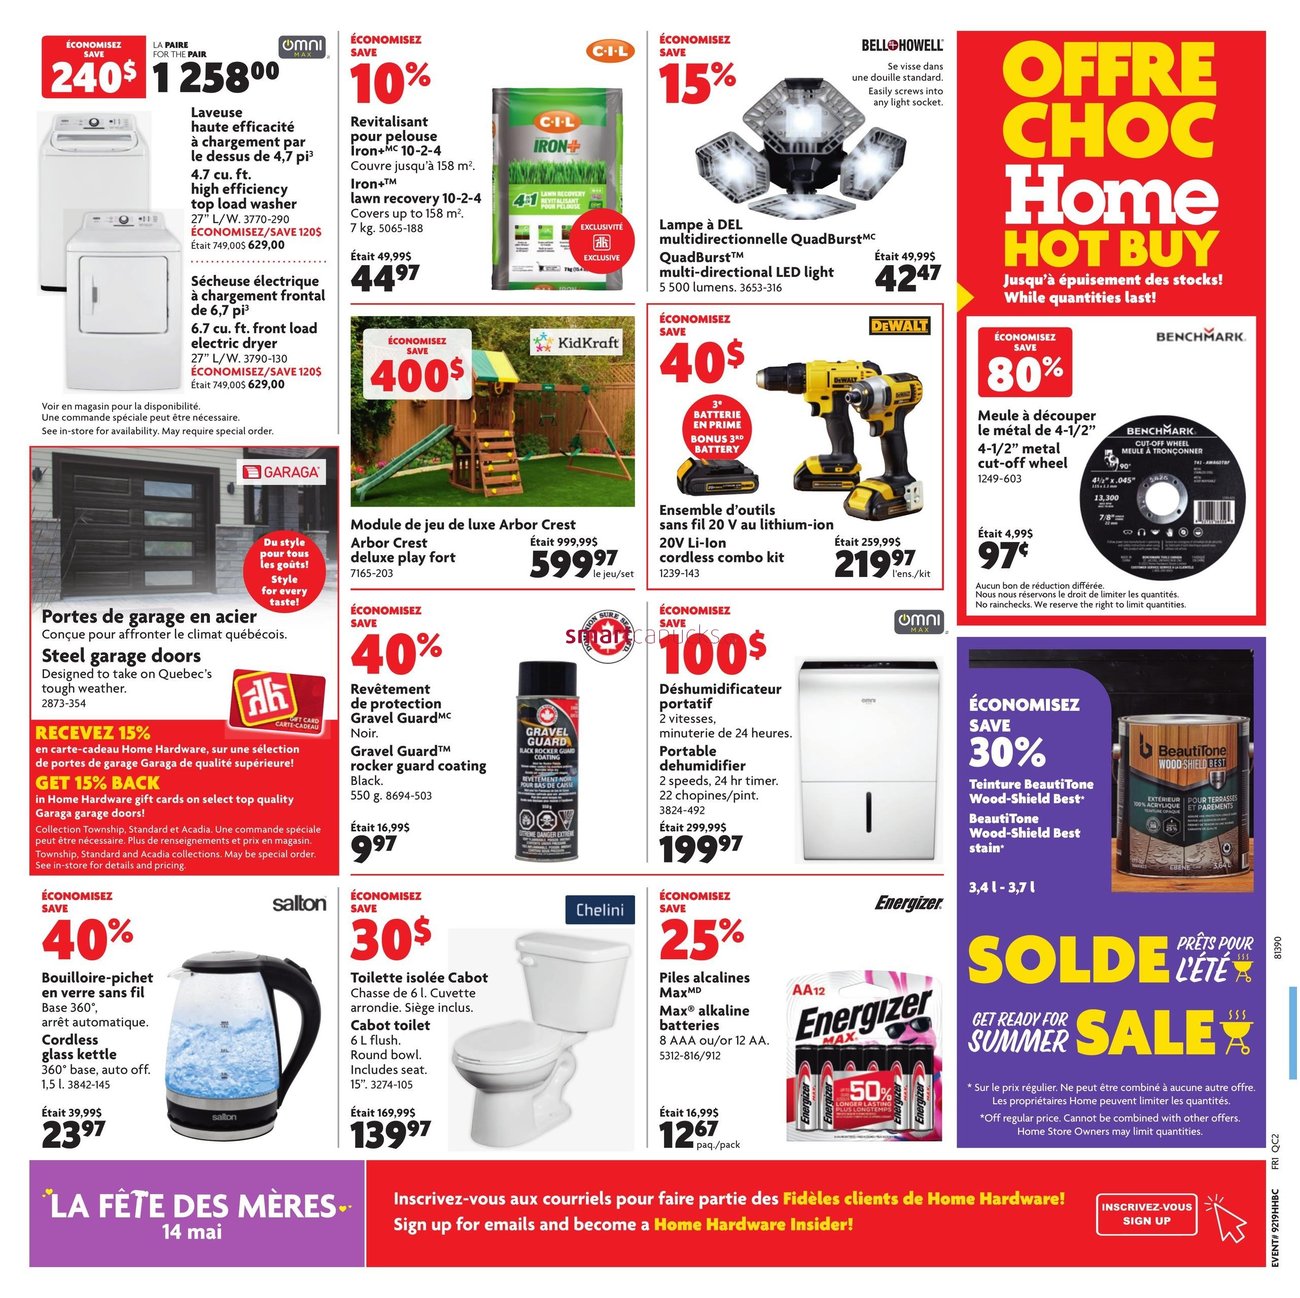 Home Hardware Building Centre - Quebec - 2 Weeks of Savings - Page 2